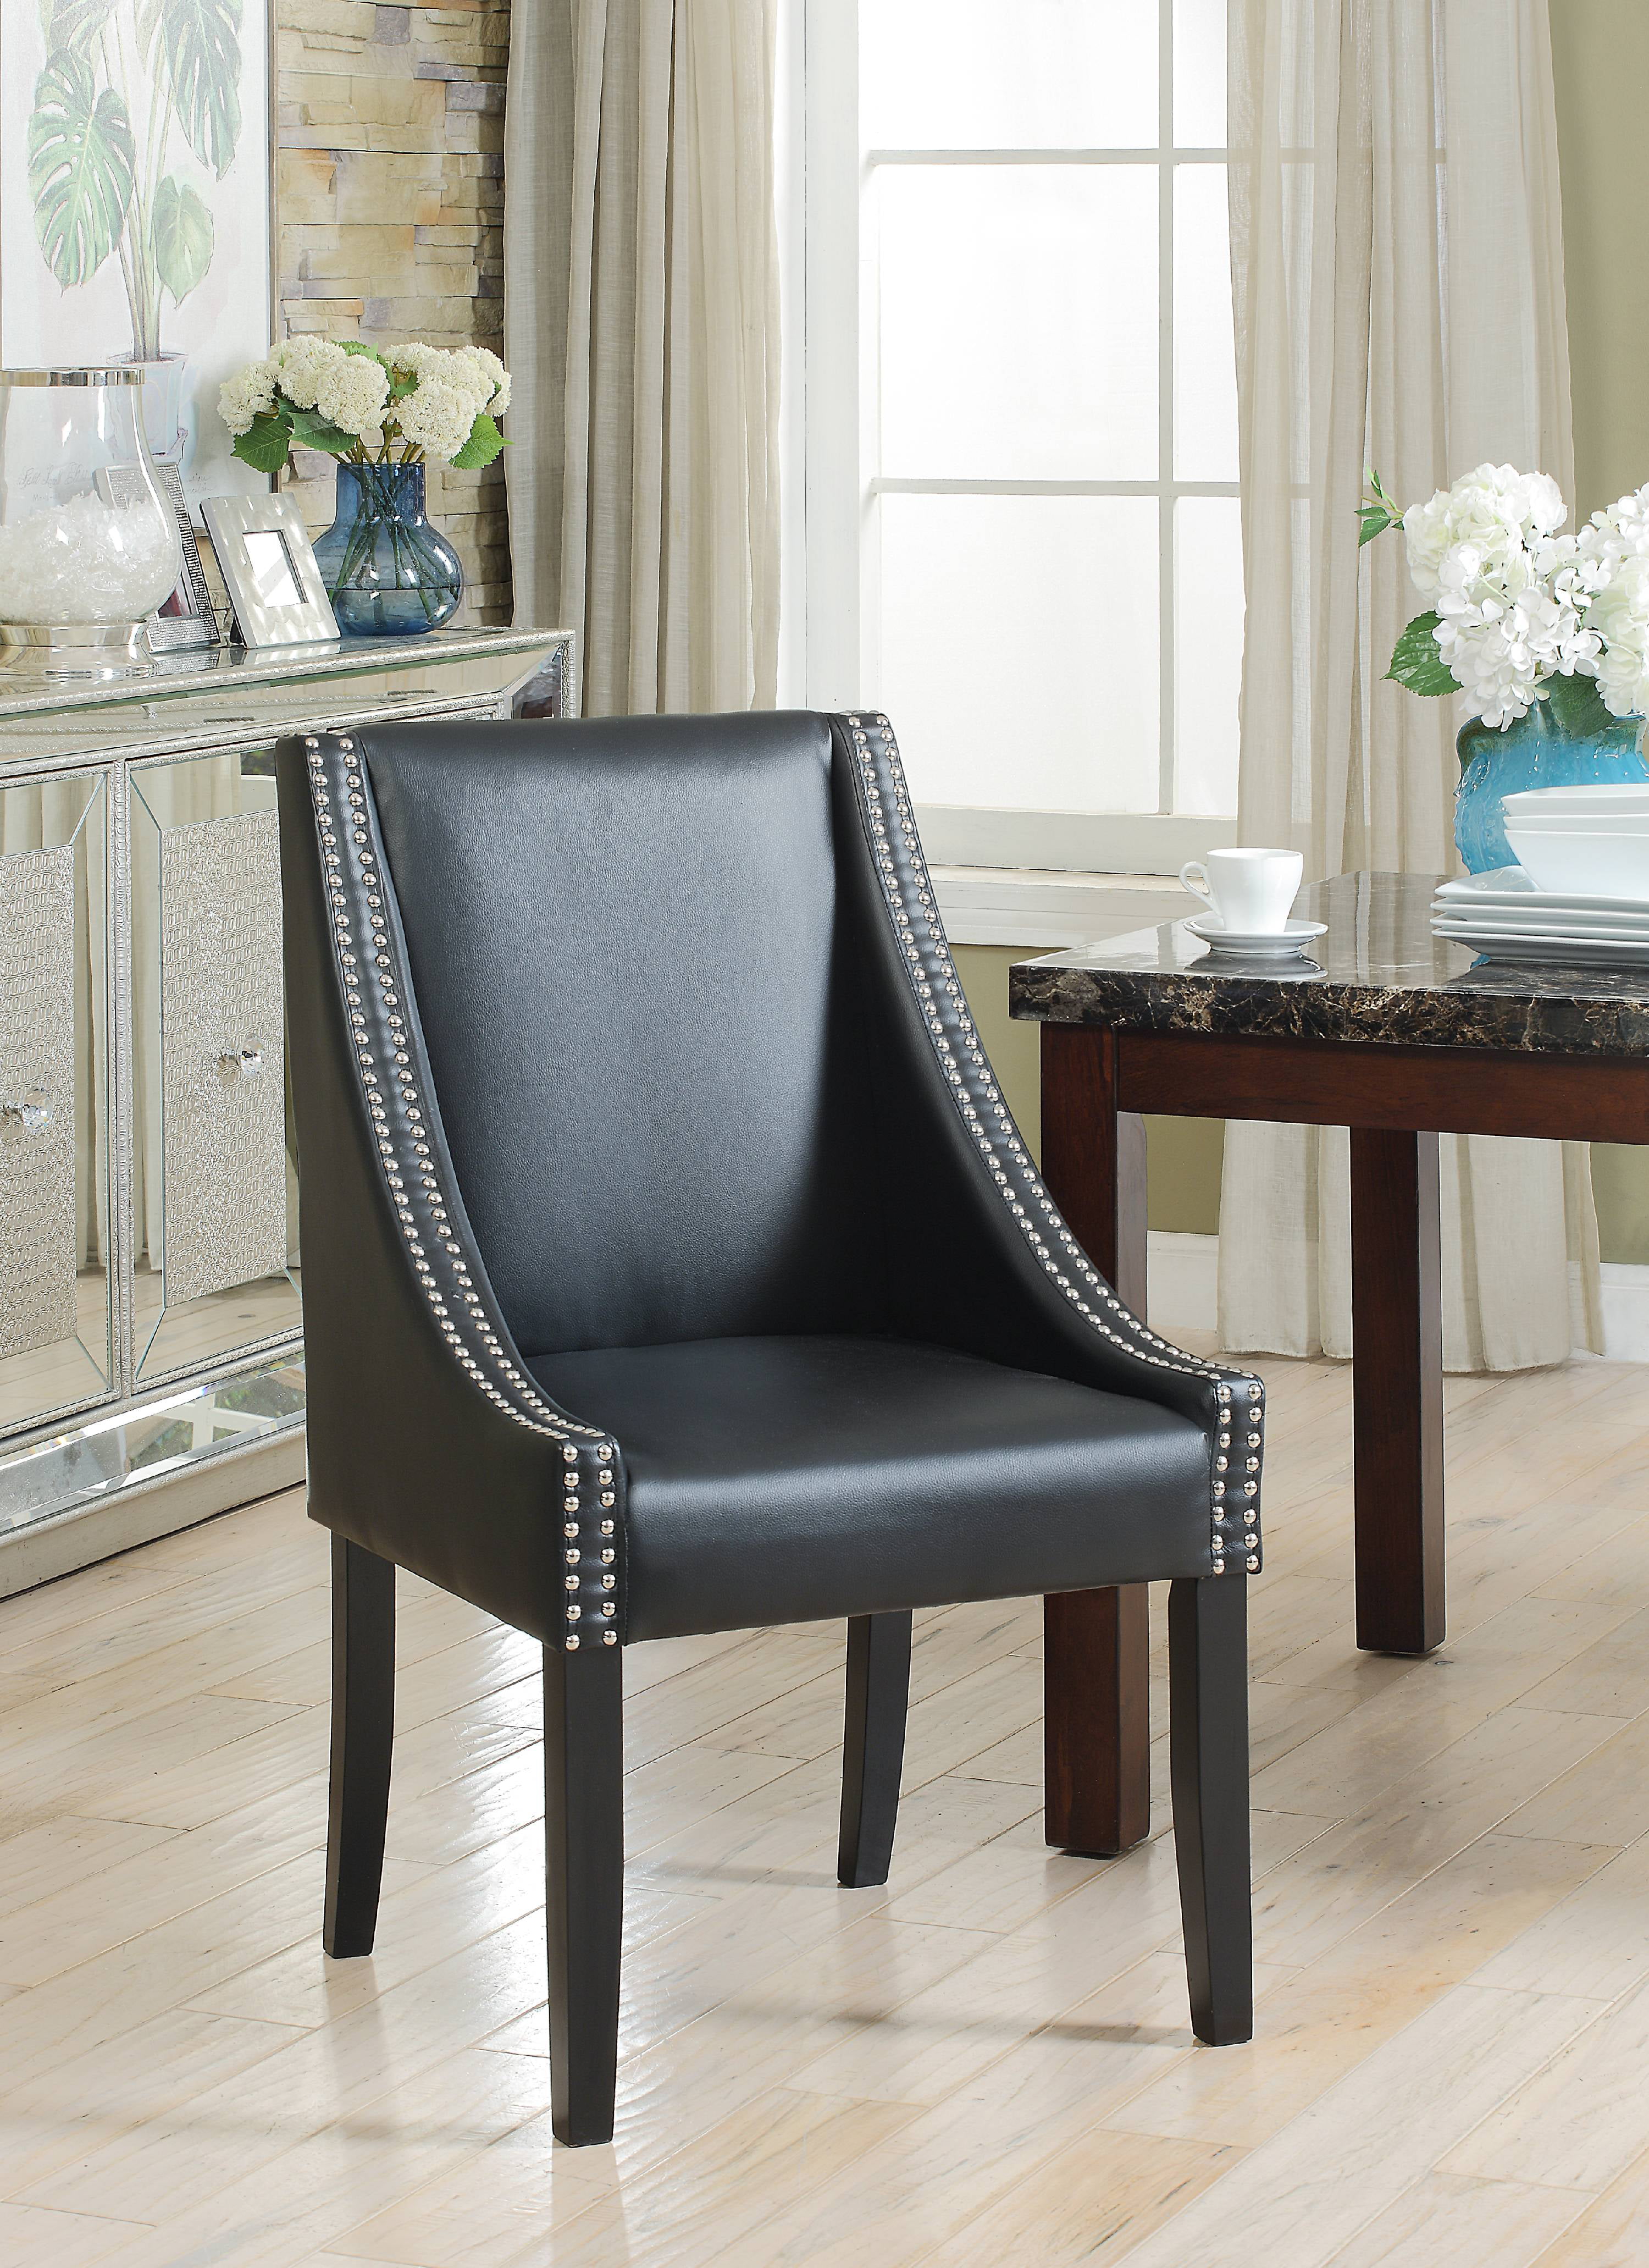 Leather Dining Chairs With Arms Leather Dining Chairs With Arms